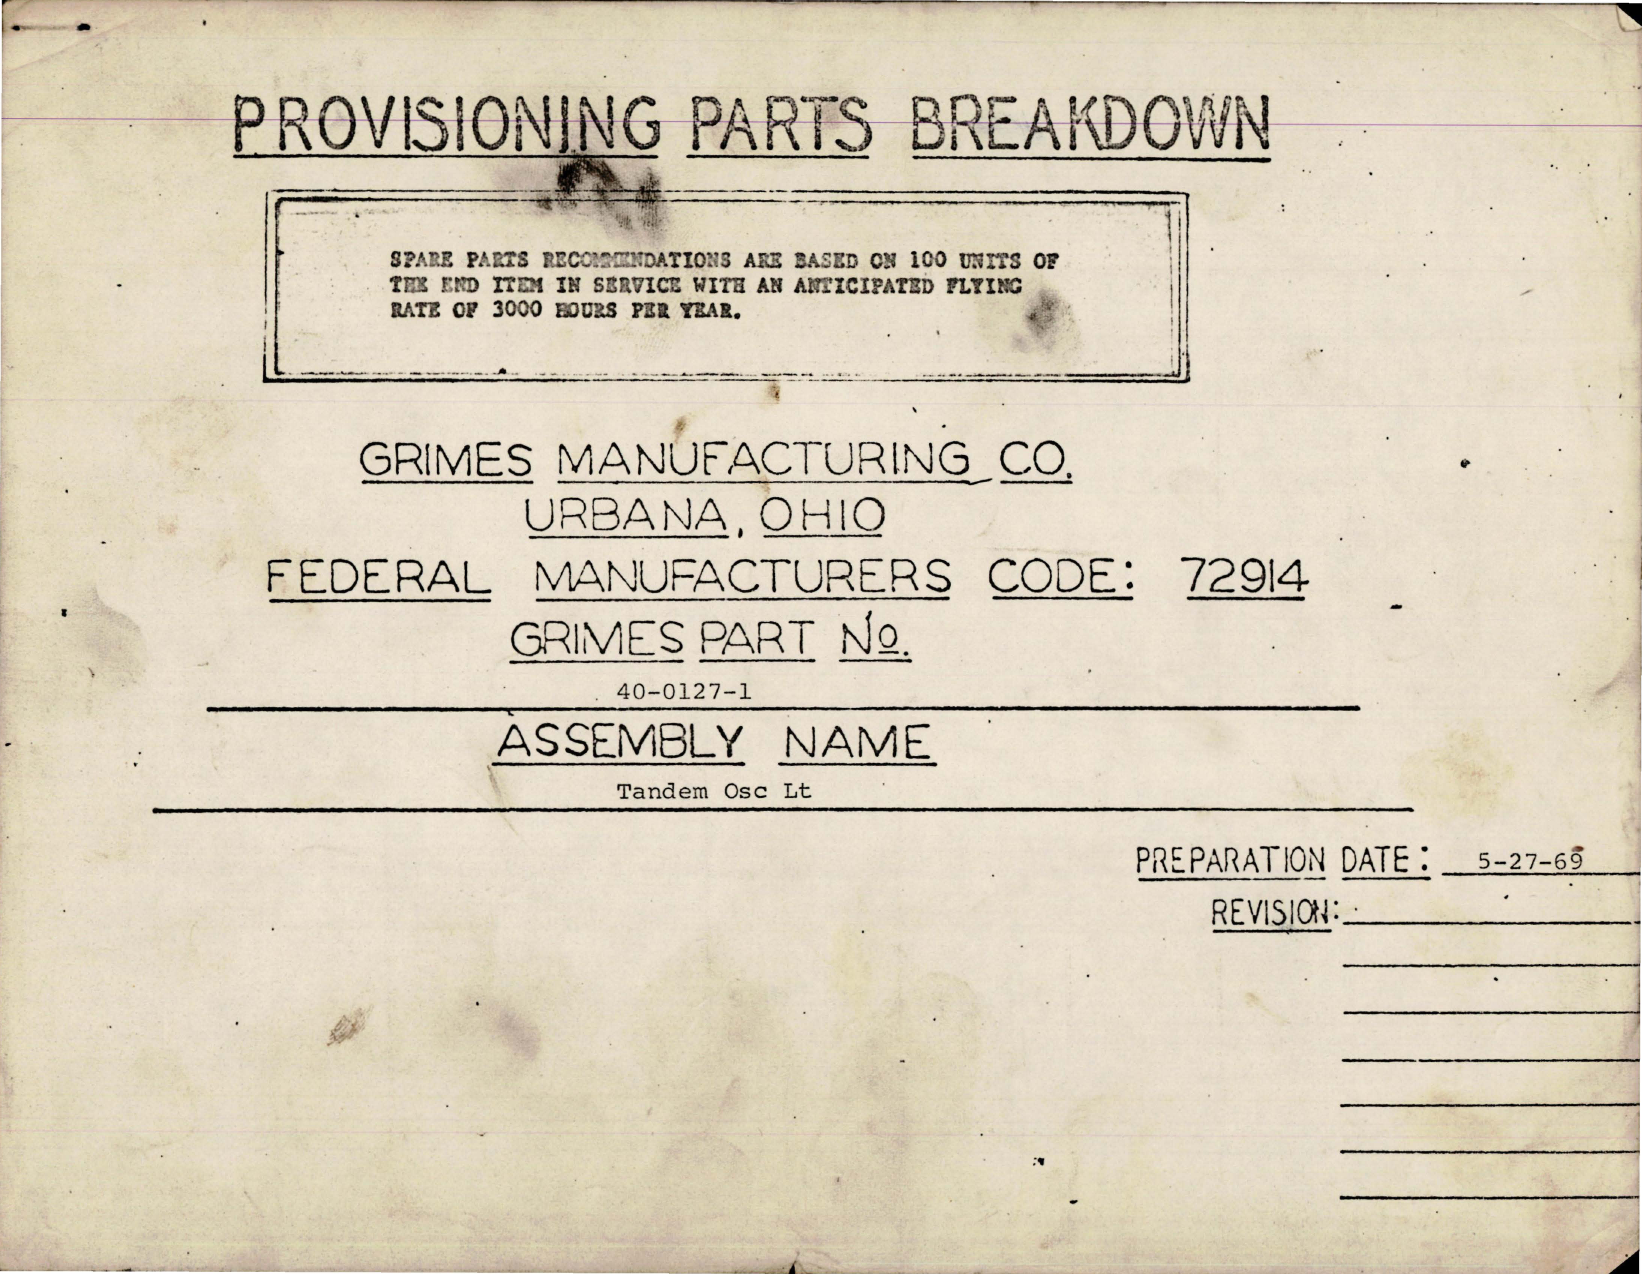 Sample page 1 from AirCorps Library document: Provisioning Parts Breakdown for Tandem Oscillating Light - Part 40-0127-1 